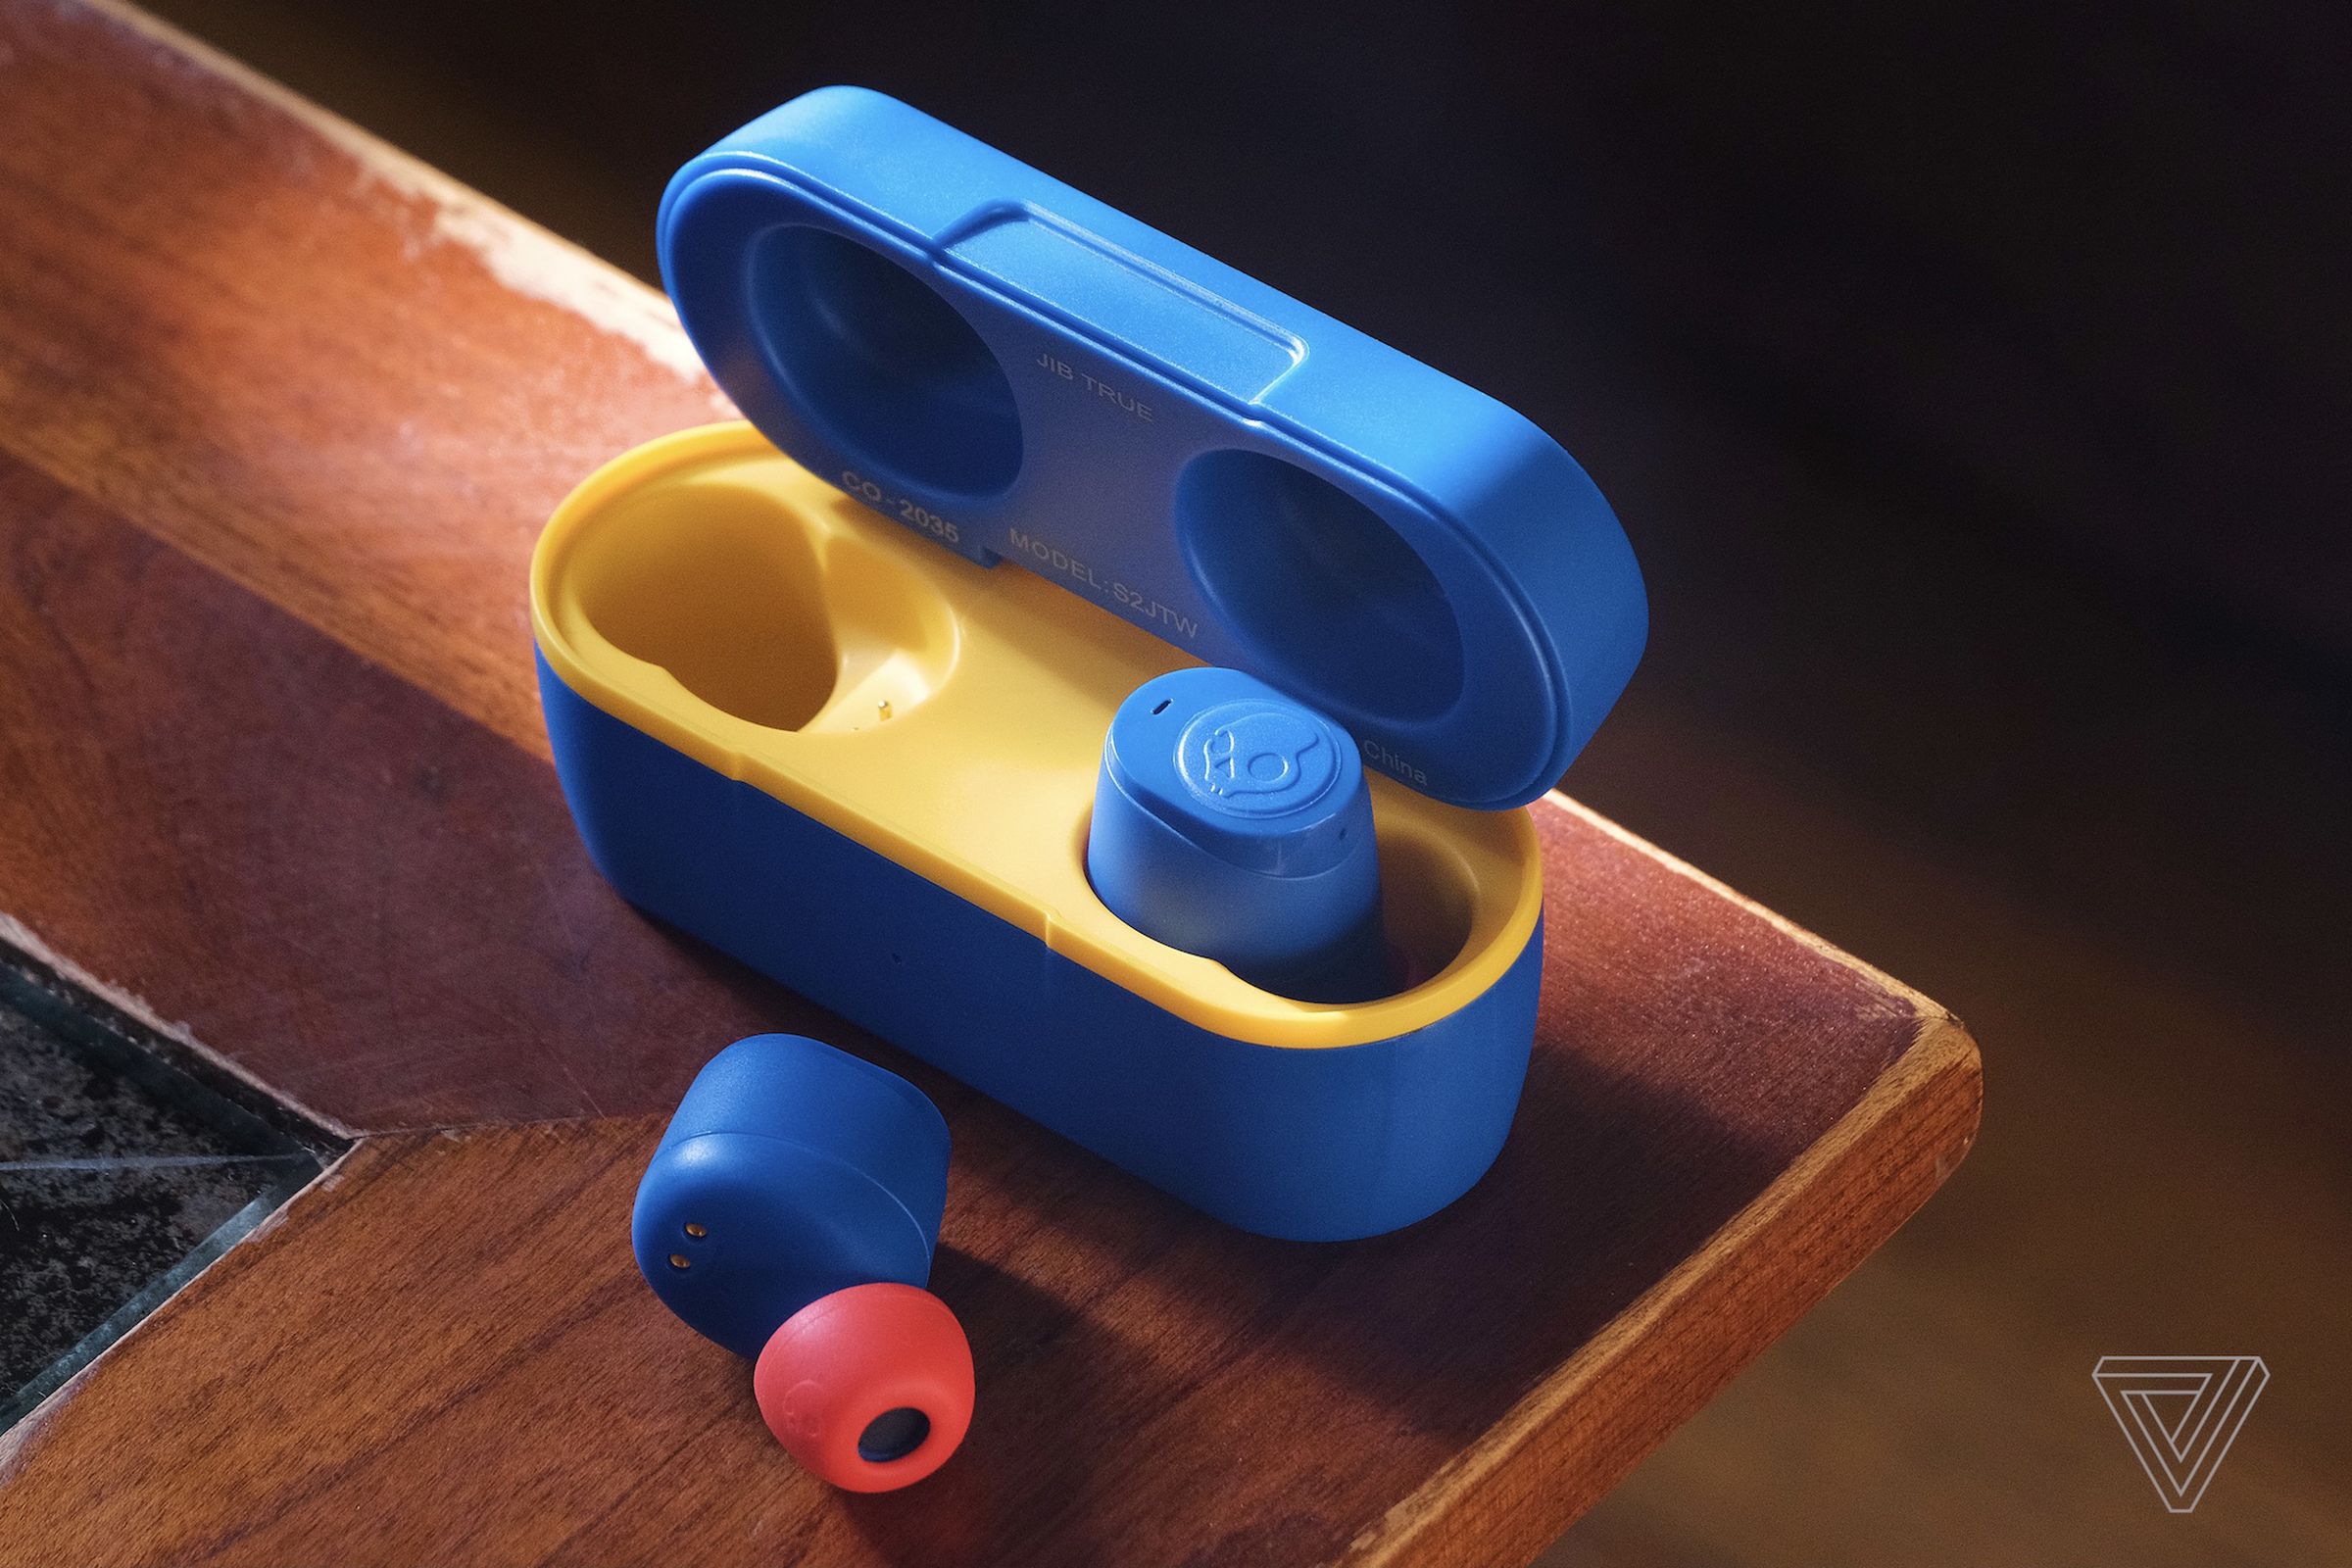 The colorful blue and red Skullcandy Jib True Wireless earbuds, pictured on a table in their blue and yellow charging case.